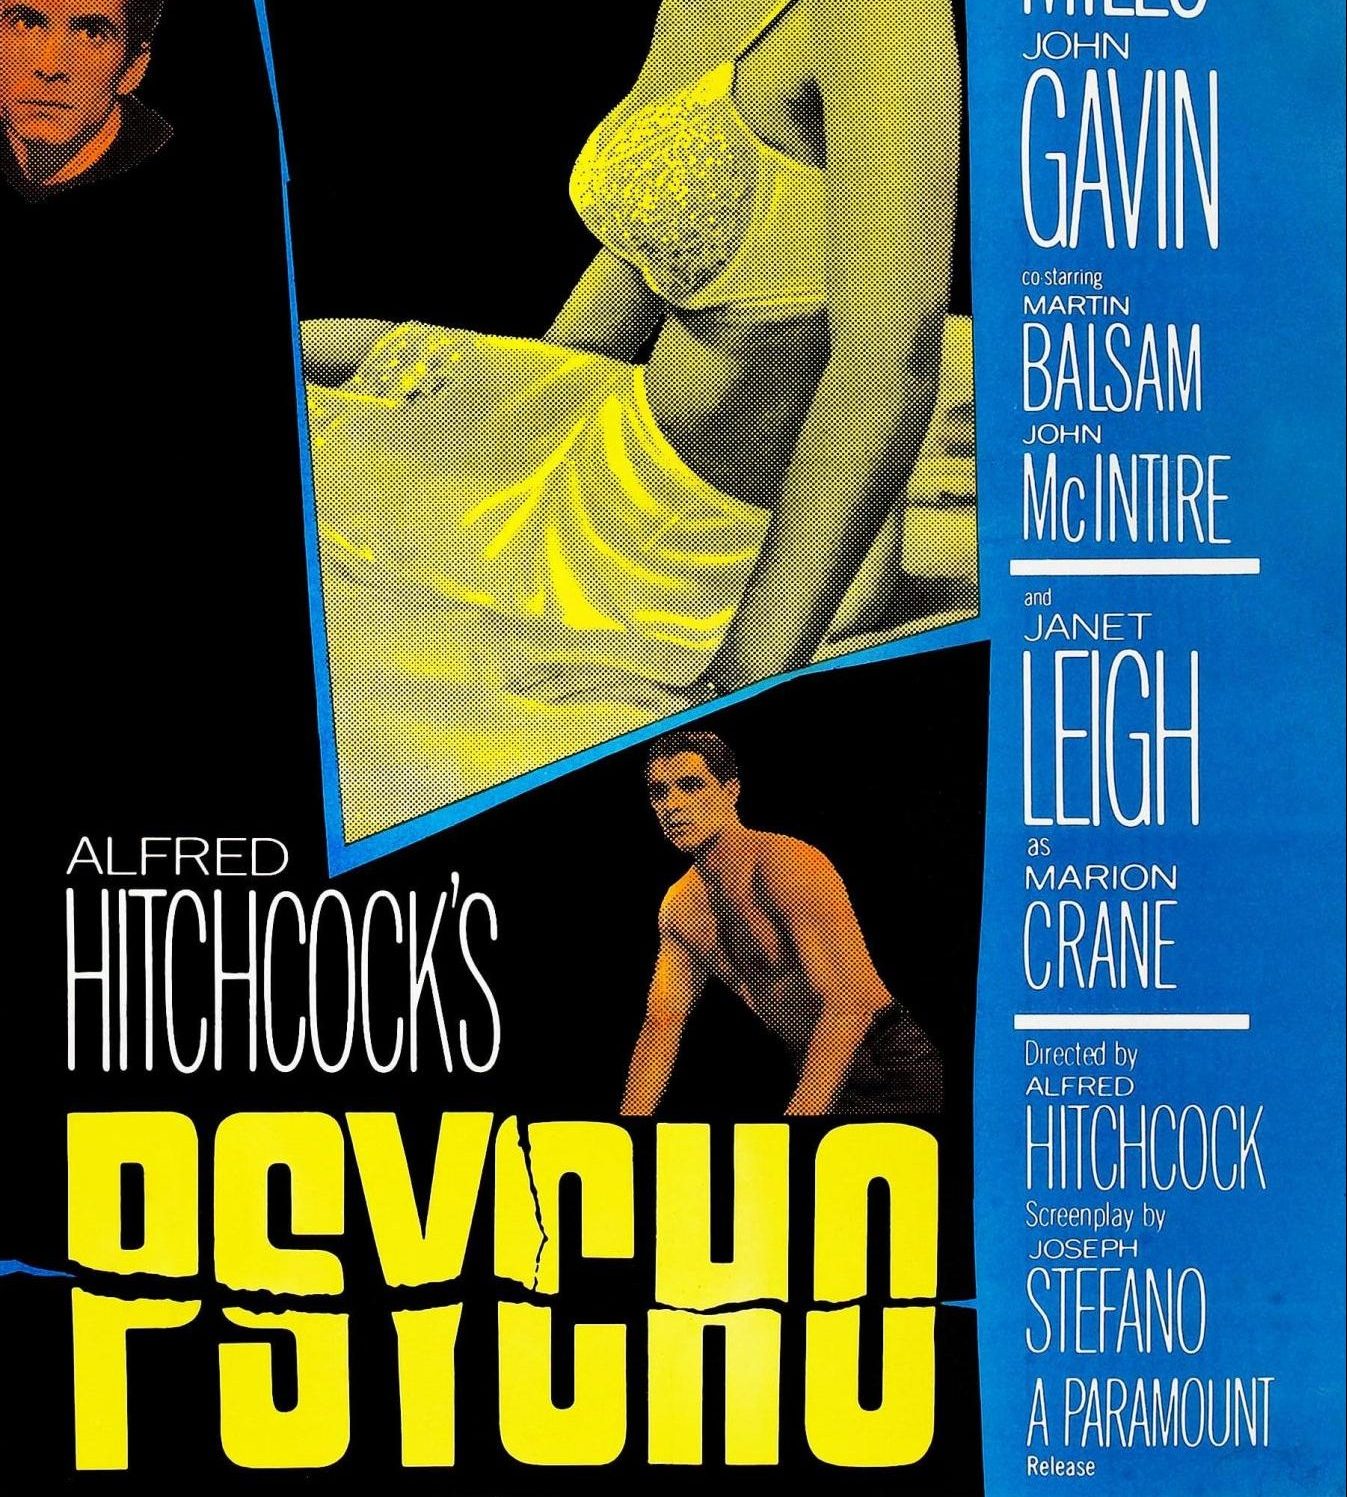 Norman Bates; Psycho
(Provided by 	
Shamley Productions and Paramount Pictures)